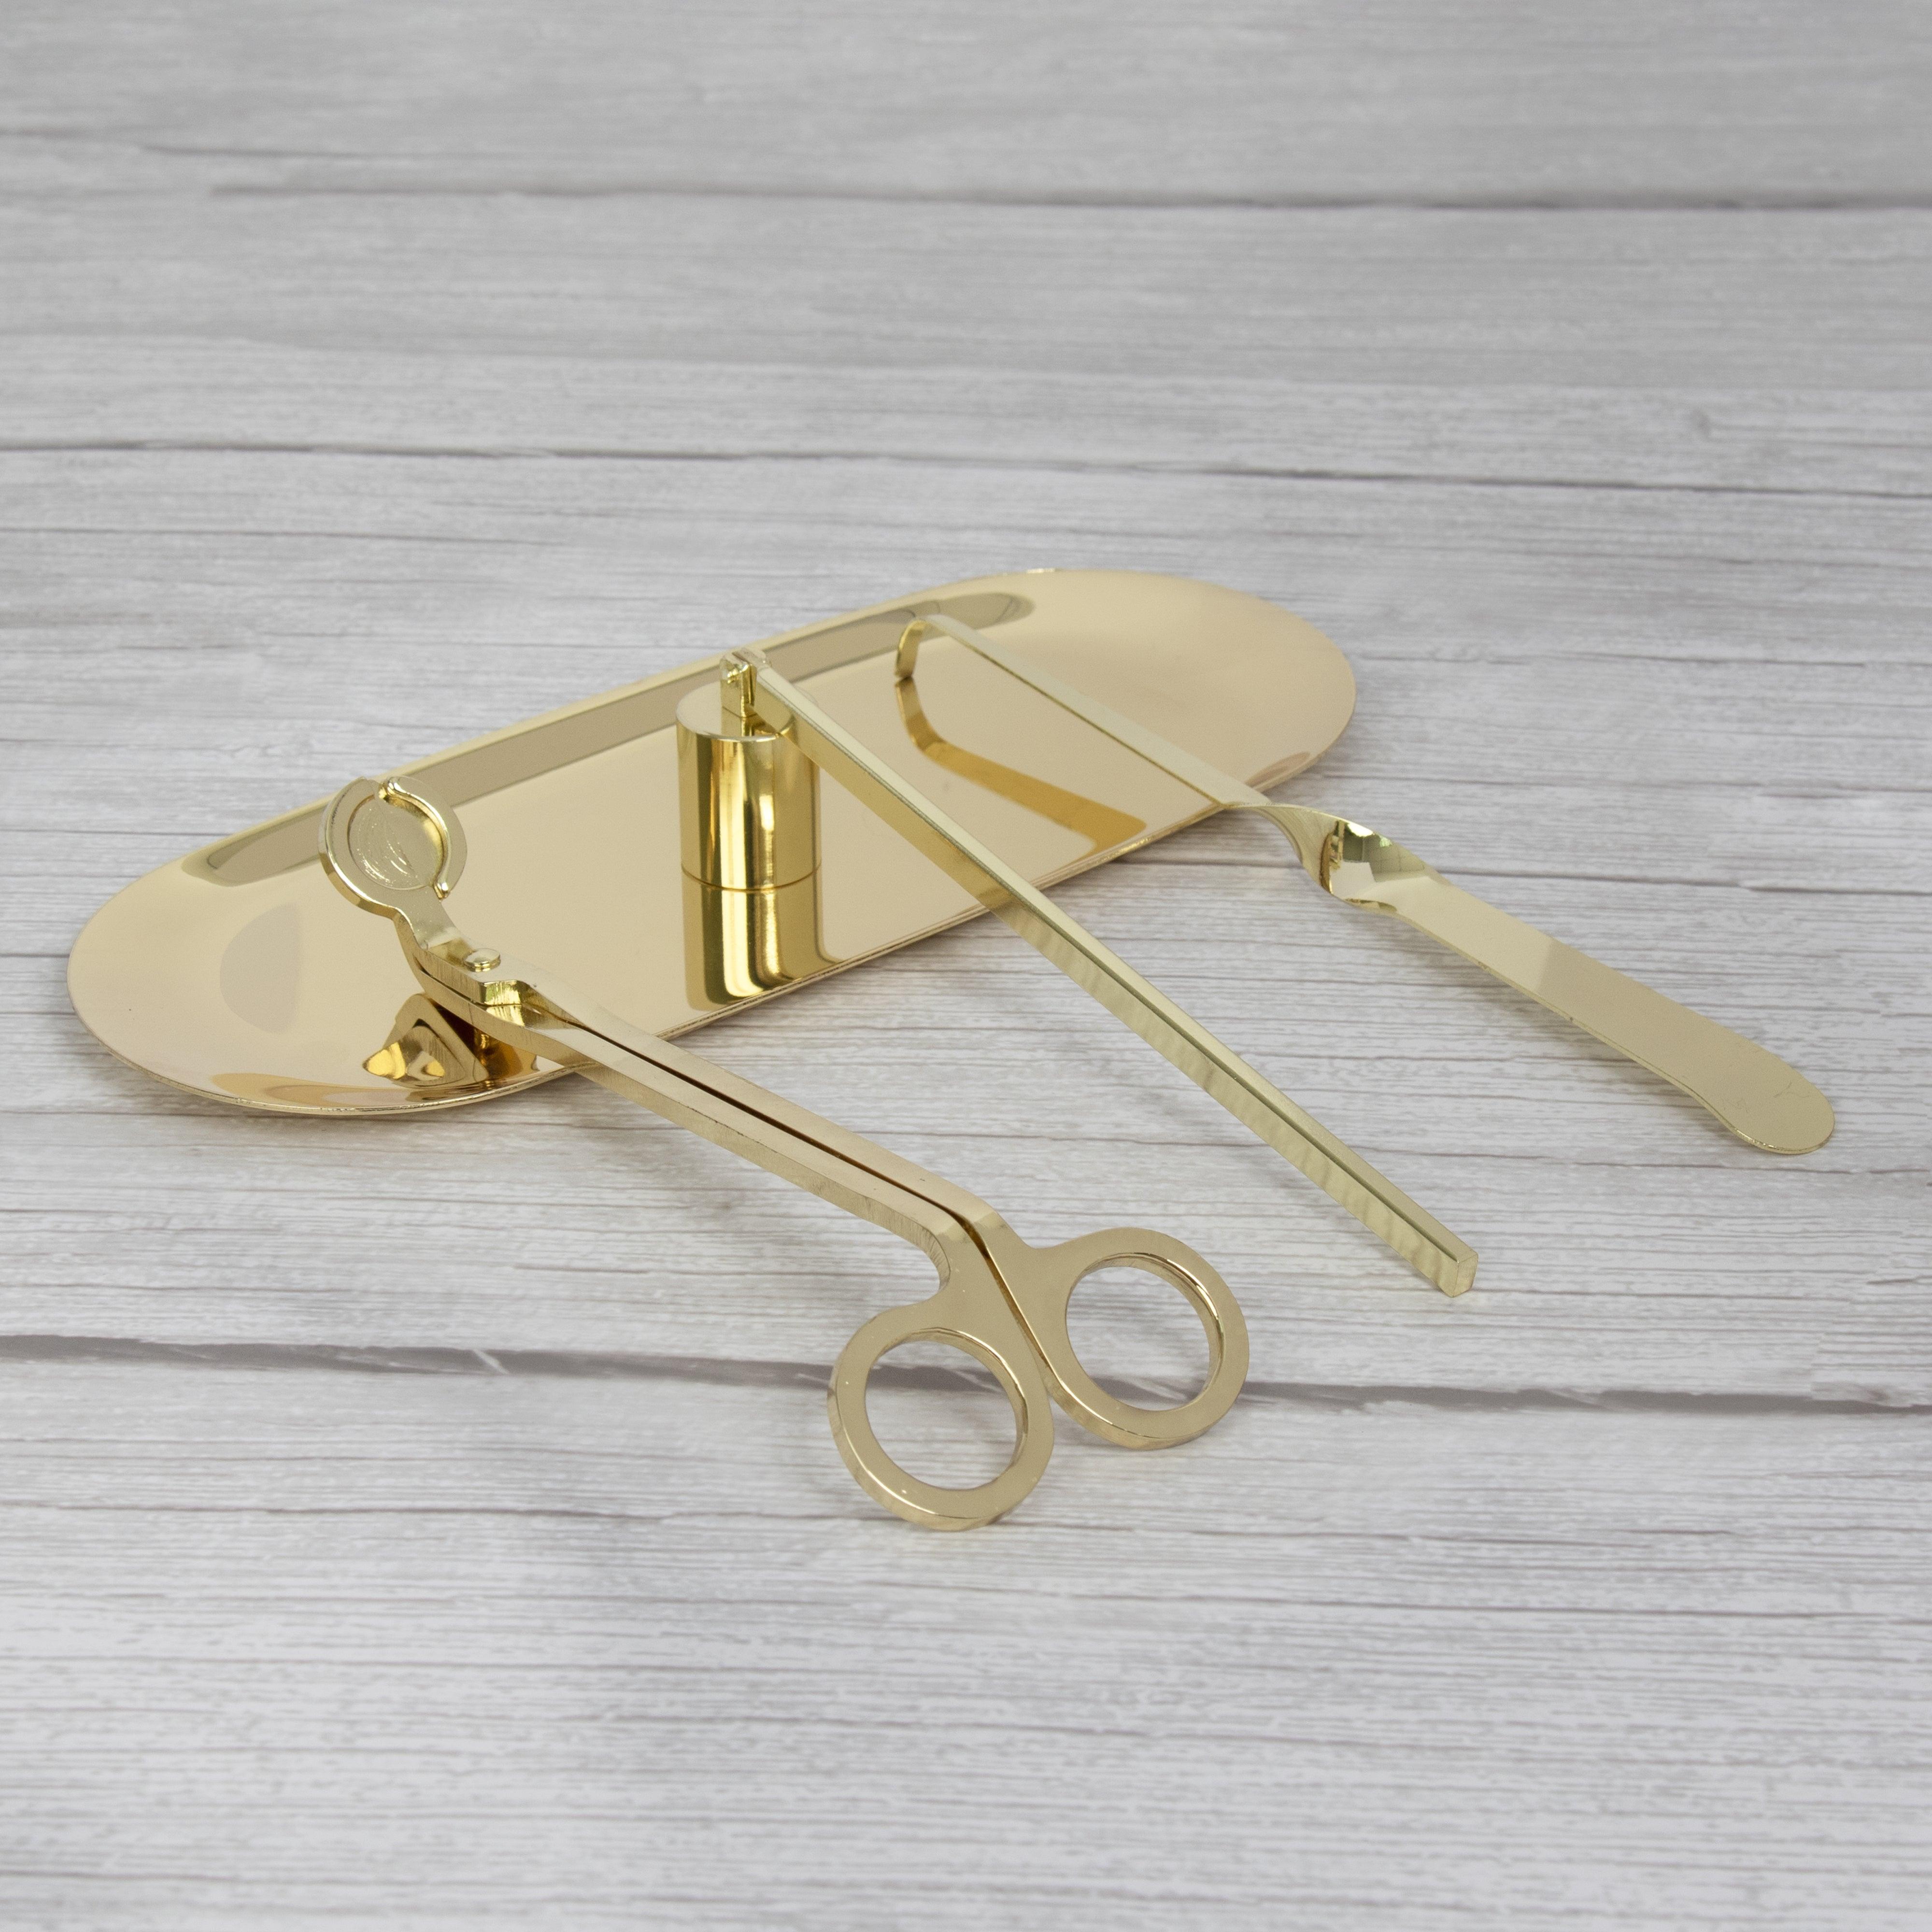 Candle Wick Trimmer, Snuffer and Dipper Set (Gold) - VAUCLUSE